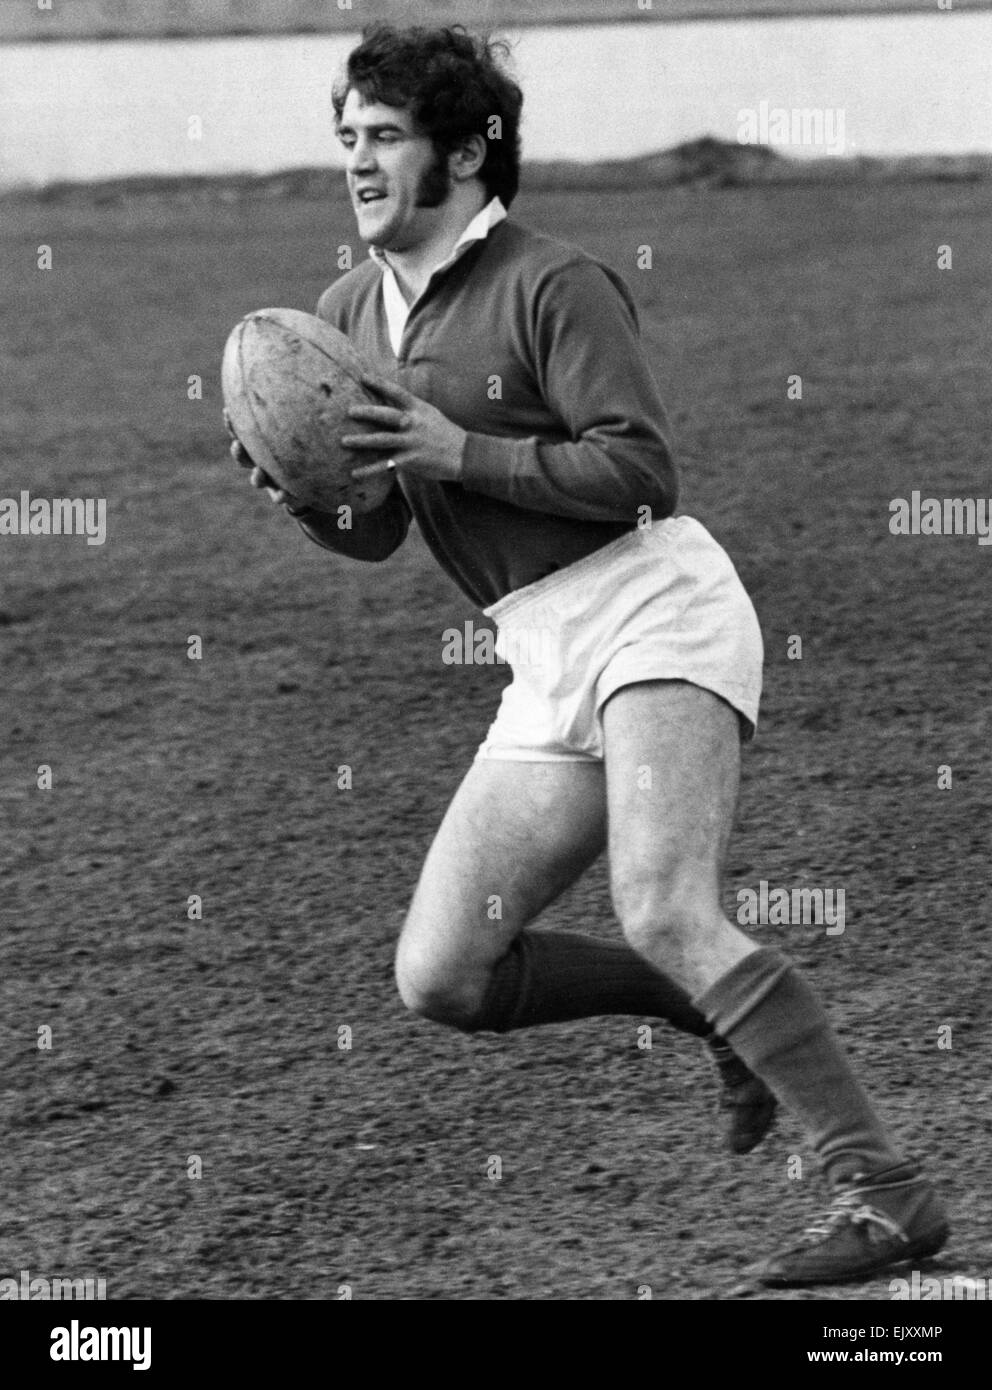 David Watkins MBE (born March 5, 1942 in Blaina, Wales) is a Welsh former dual-code rugby international, having played both rugby union and rugby league football between 1967 and 1983. He is the only player to have captained both the British and Irish Lions rugby union side and the Great Britain rugby league teams. Stock Photo